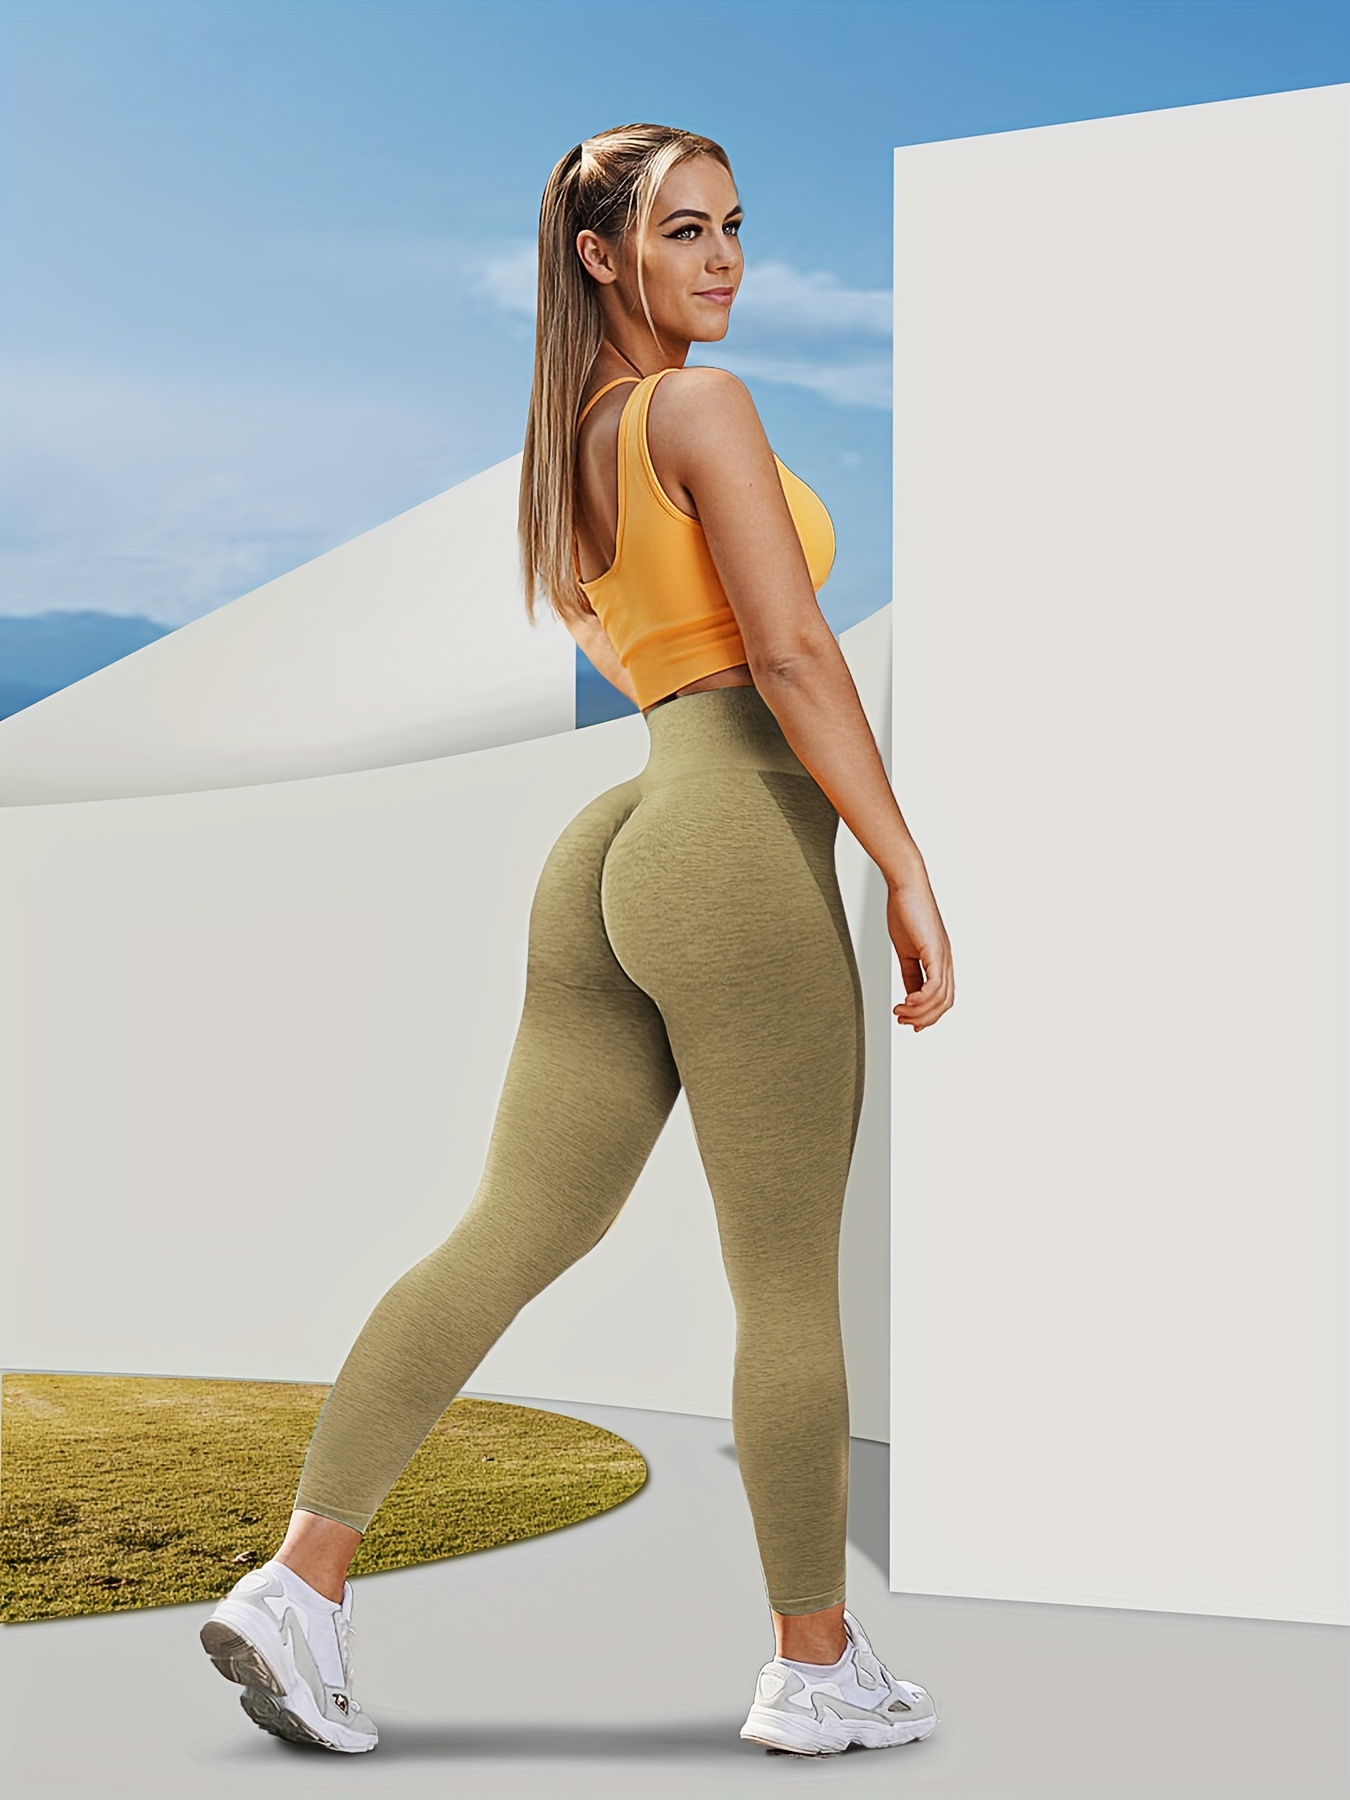 Womens Seamless Yoga Leggings High Waisted Gym Sports Pants Stretch  Athletic Fitness Butt Lift Tights Ladies Clothes